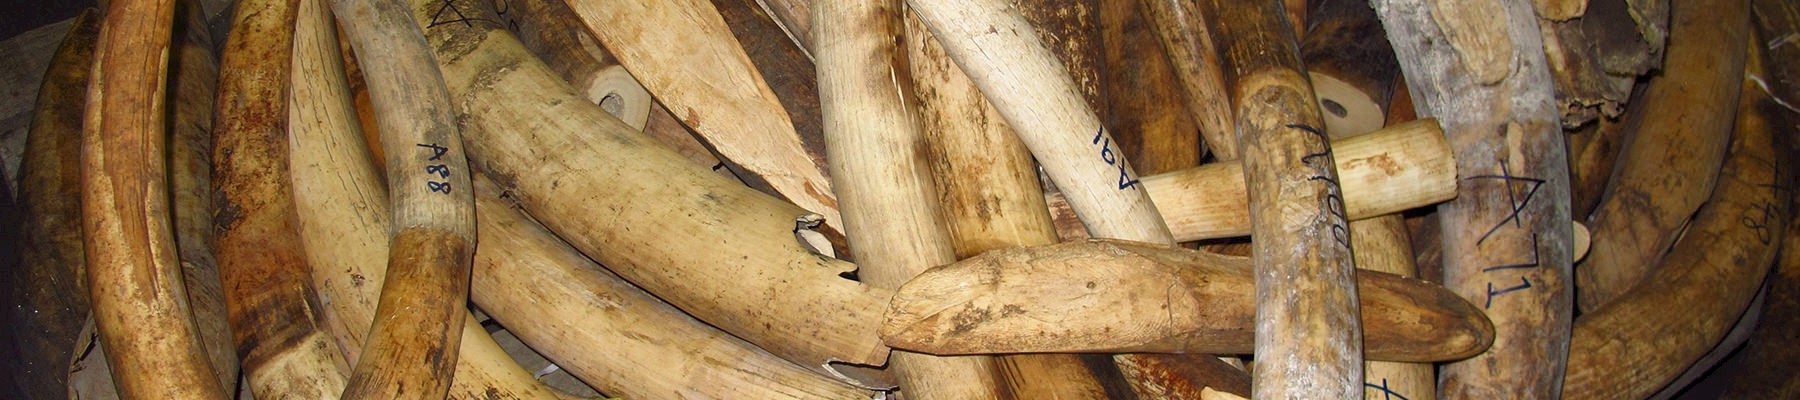 A record quantity of ivory may have been in illegal trade in 2016 © TRAFFIC